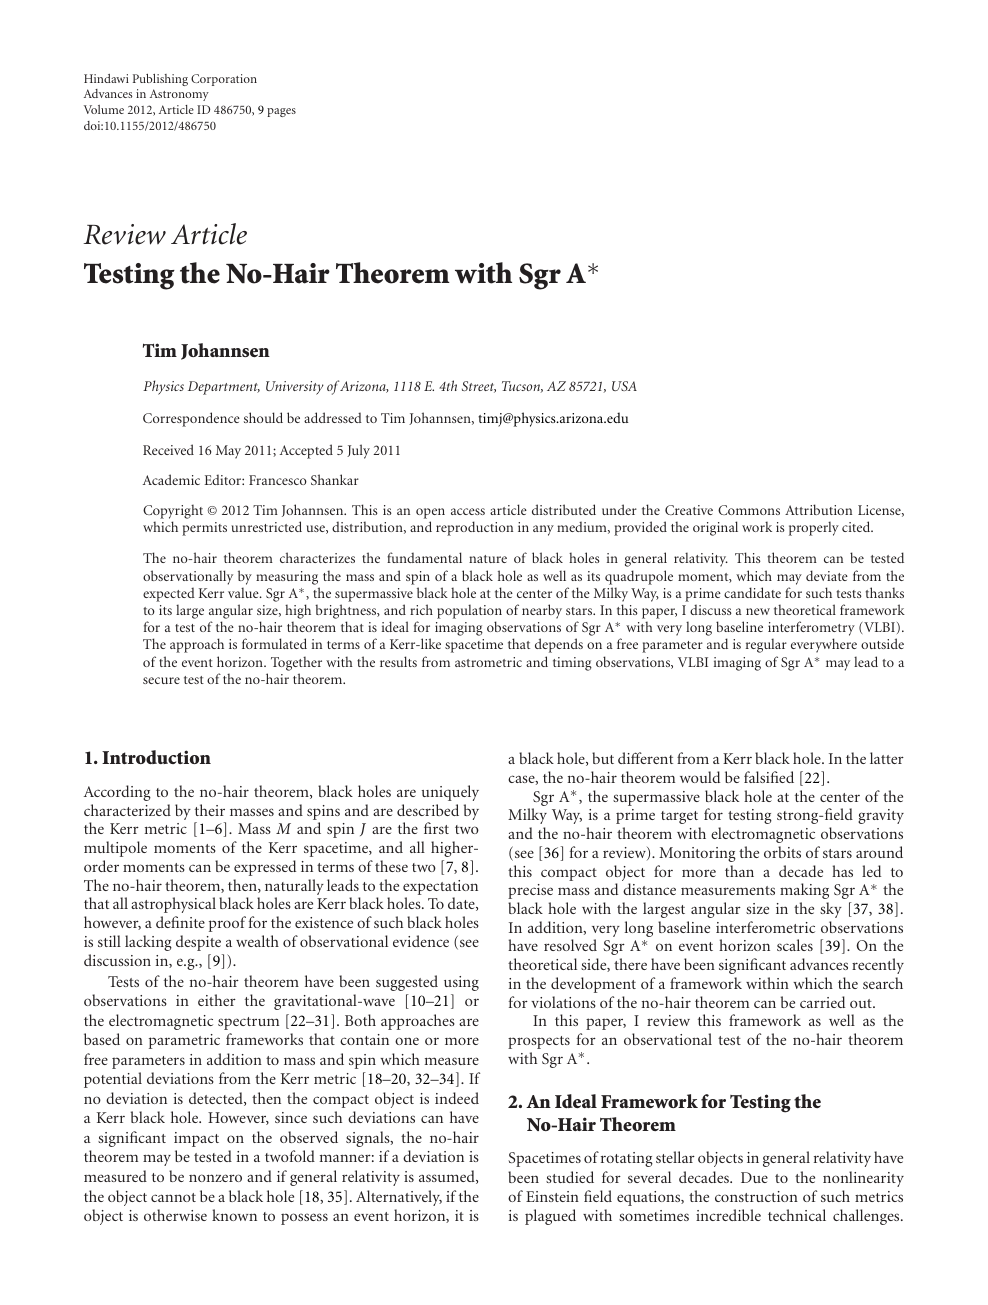 Testing the No-Hair Theorem with Sgr A* – topic of research paper in  Physical sciences. Download scholarly article PDF and read for free on  CyberLeninka open science hub.